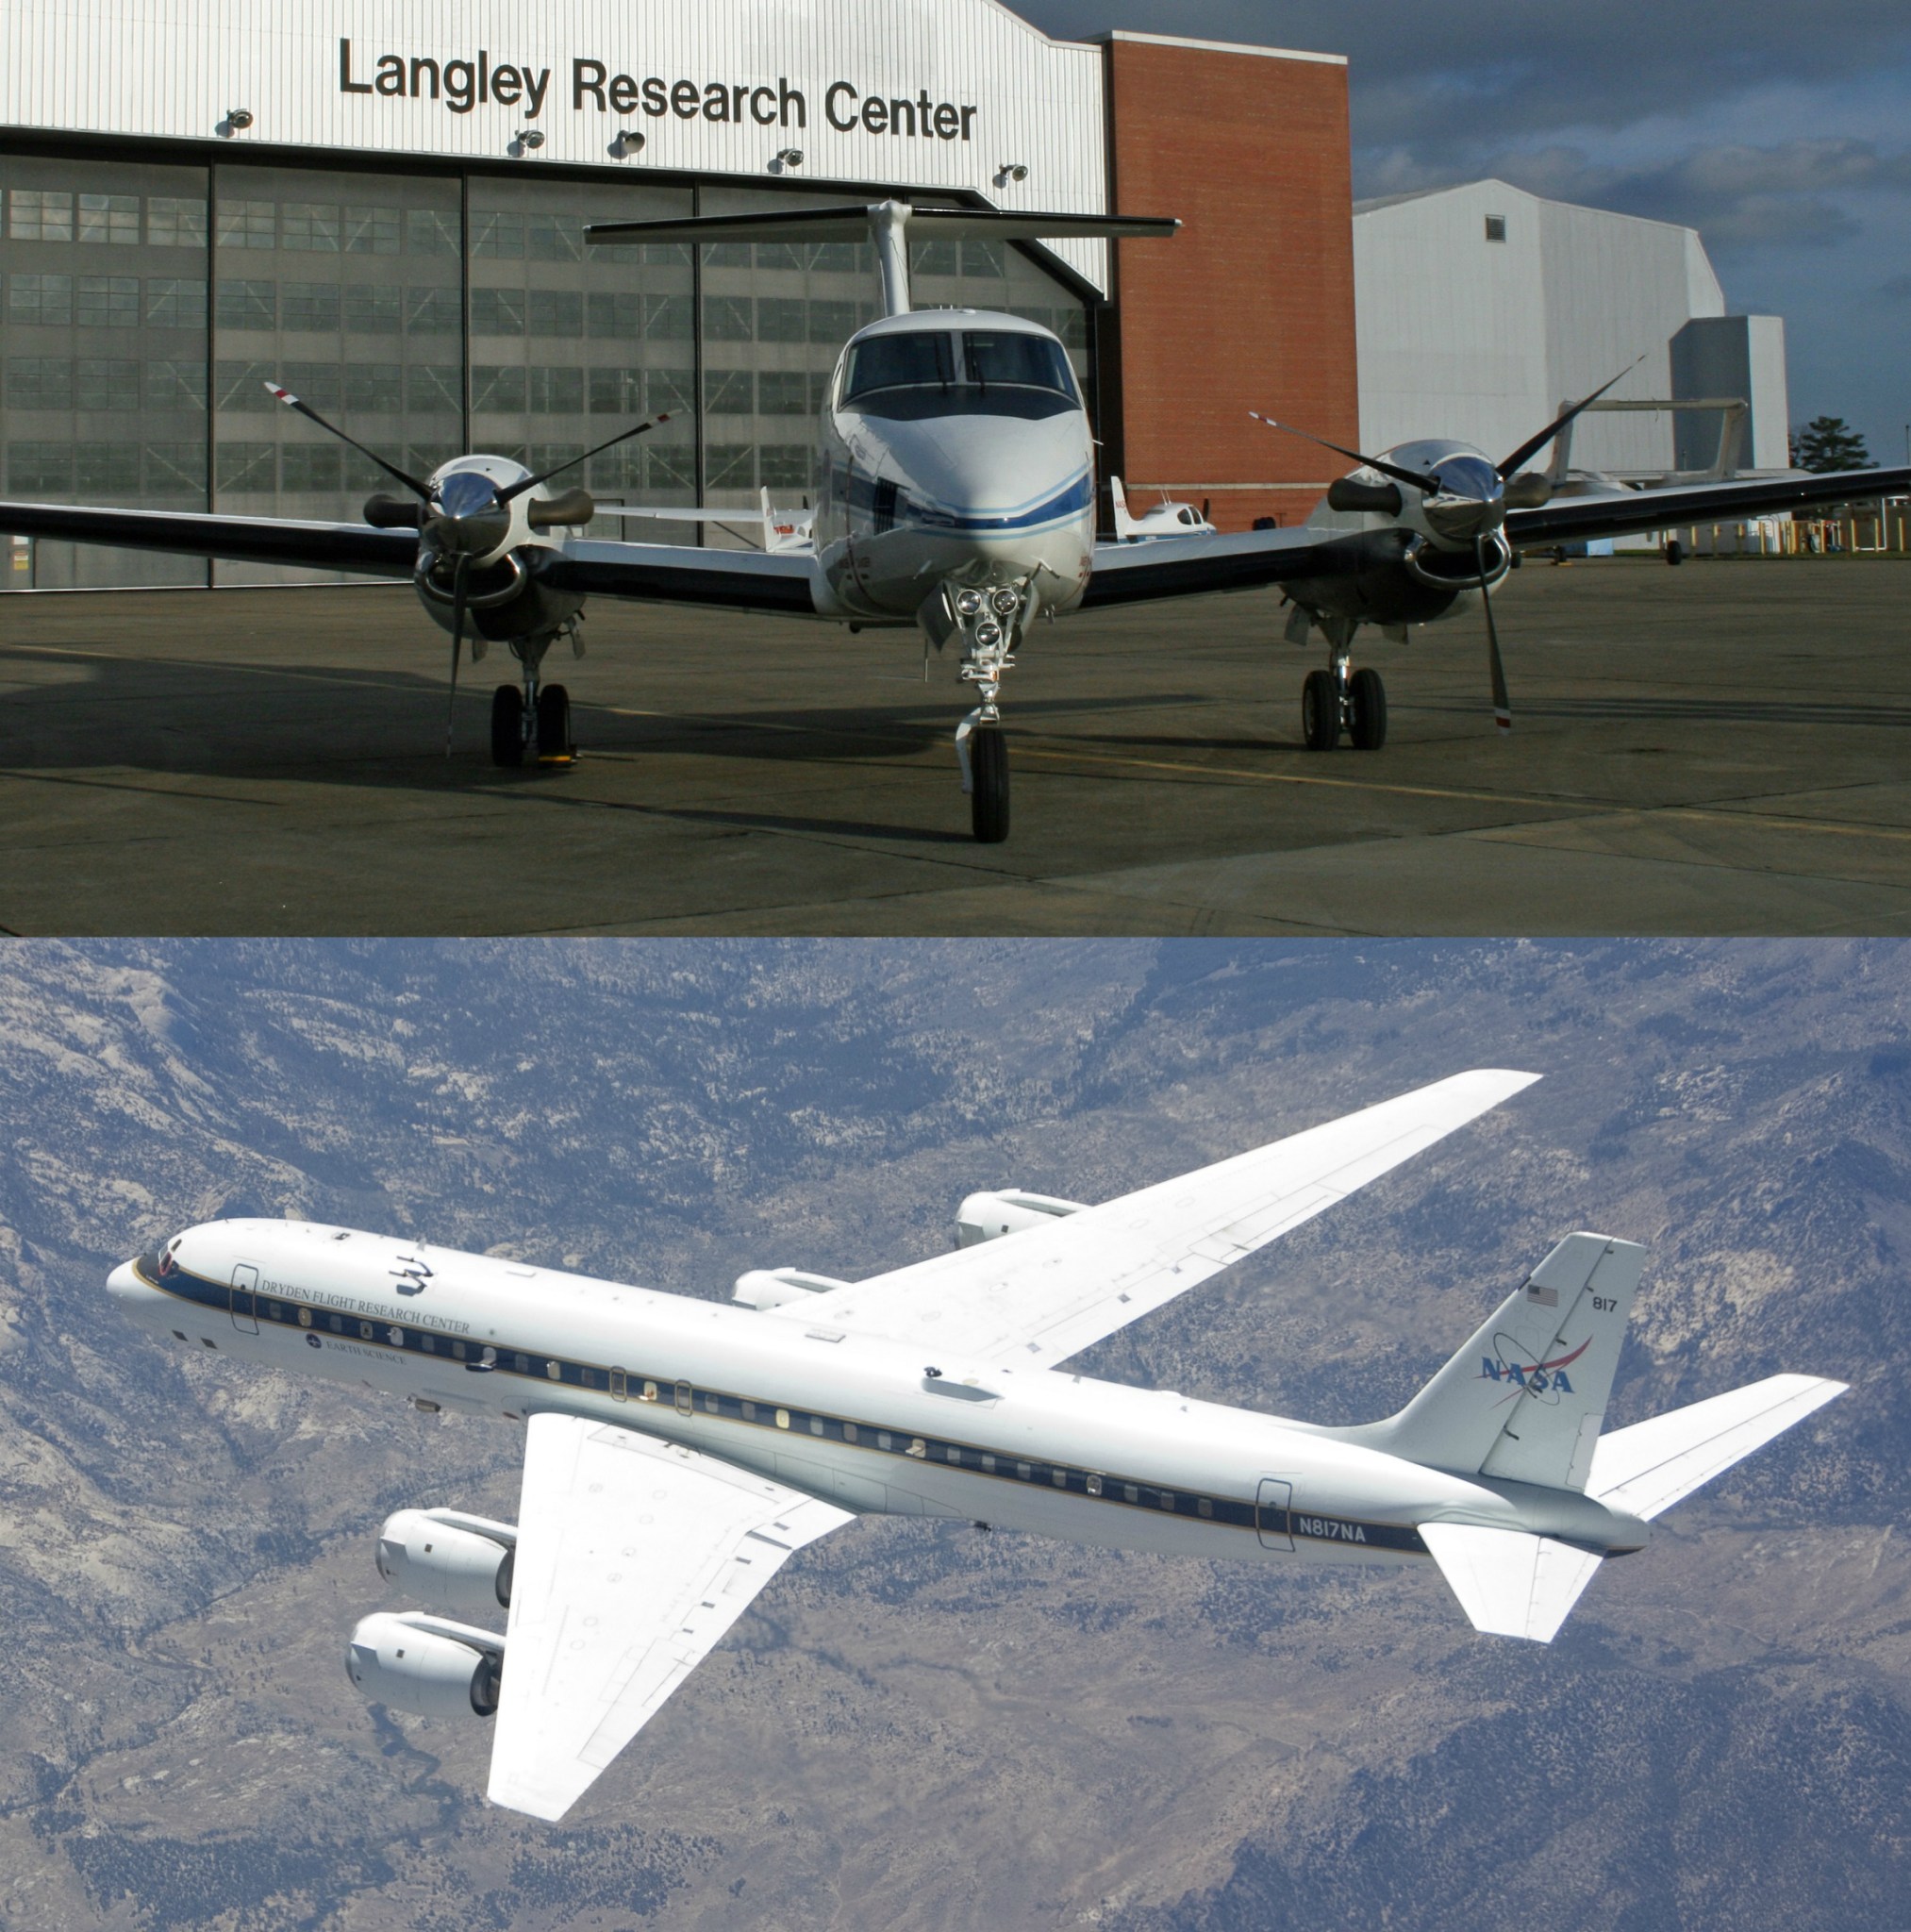 Two NASA research aircraft, the UC-12B (top) and the DC-8